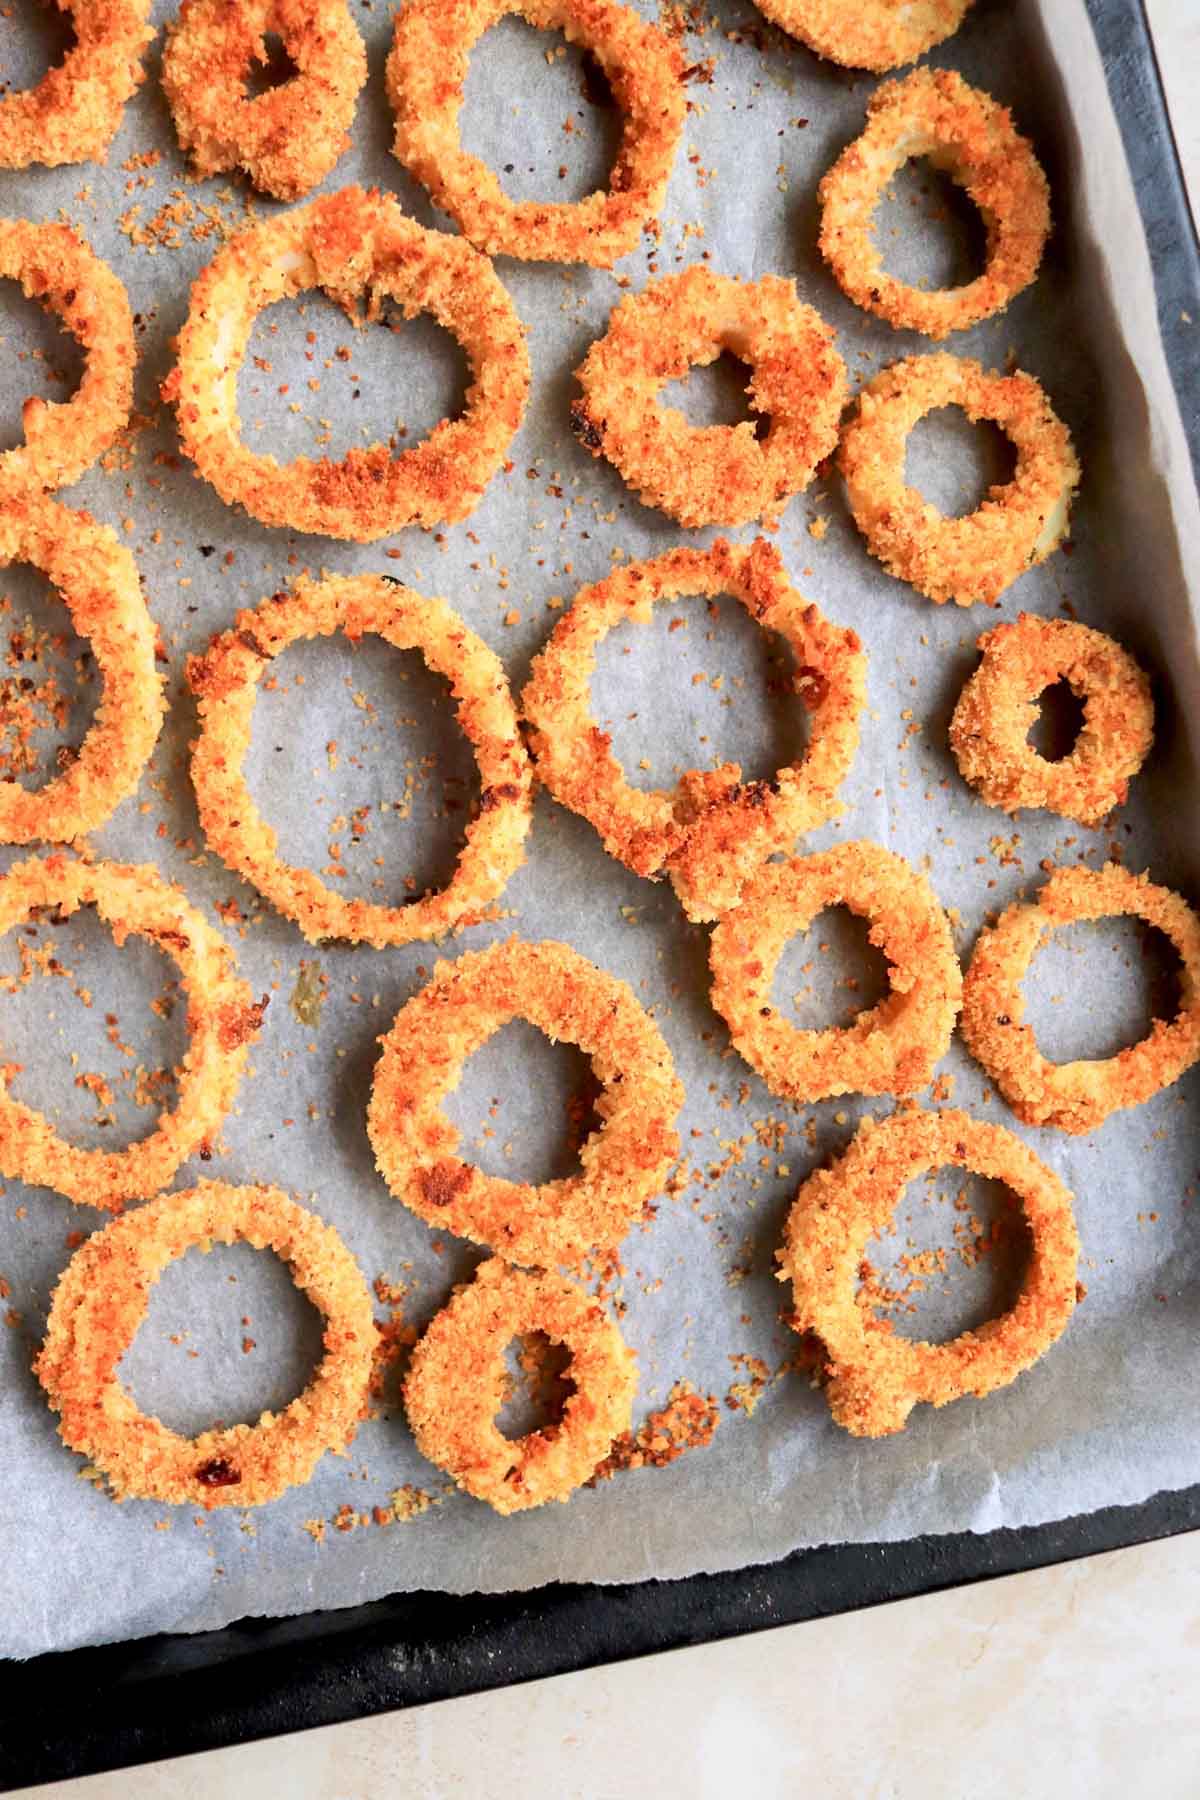 Baked onion rings on a parchment lined baking sheet.